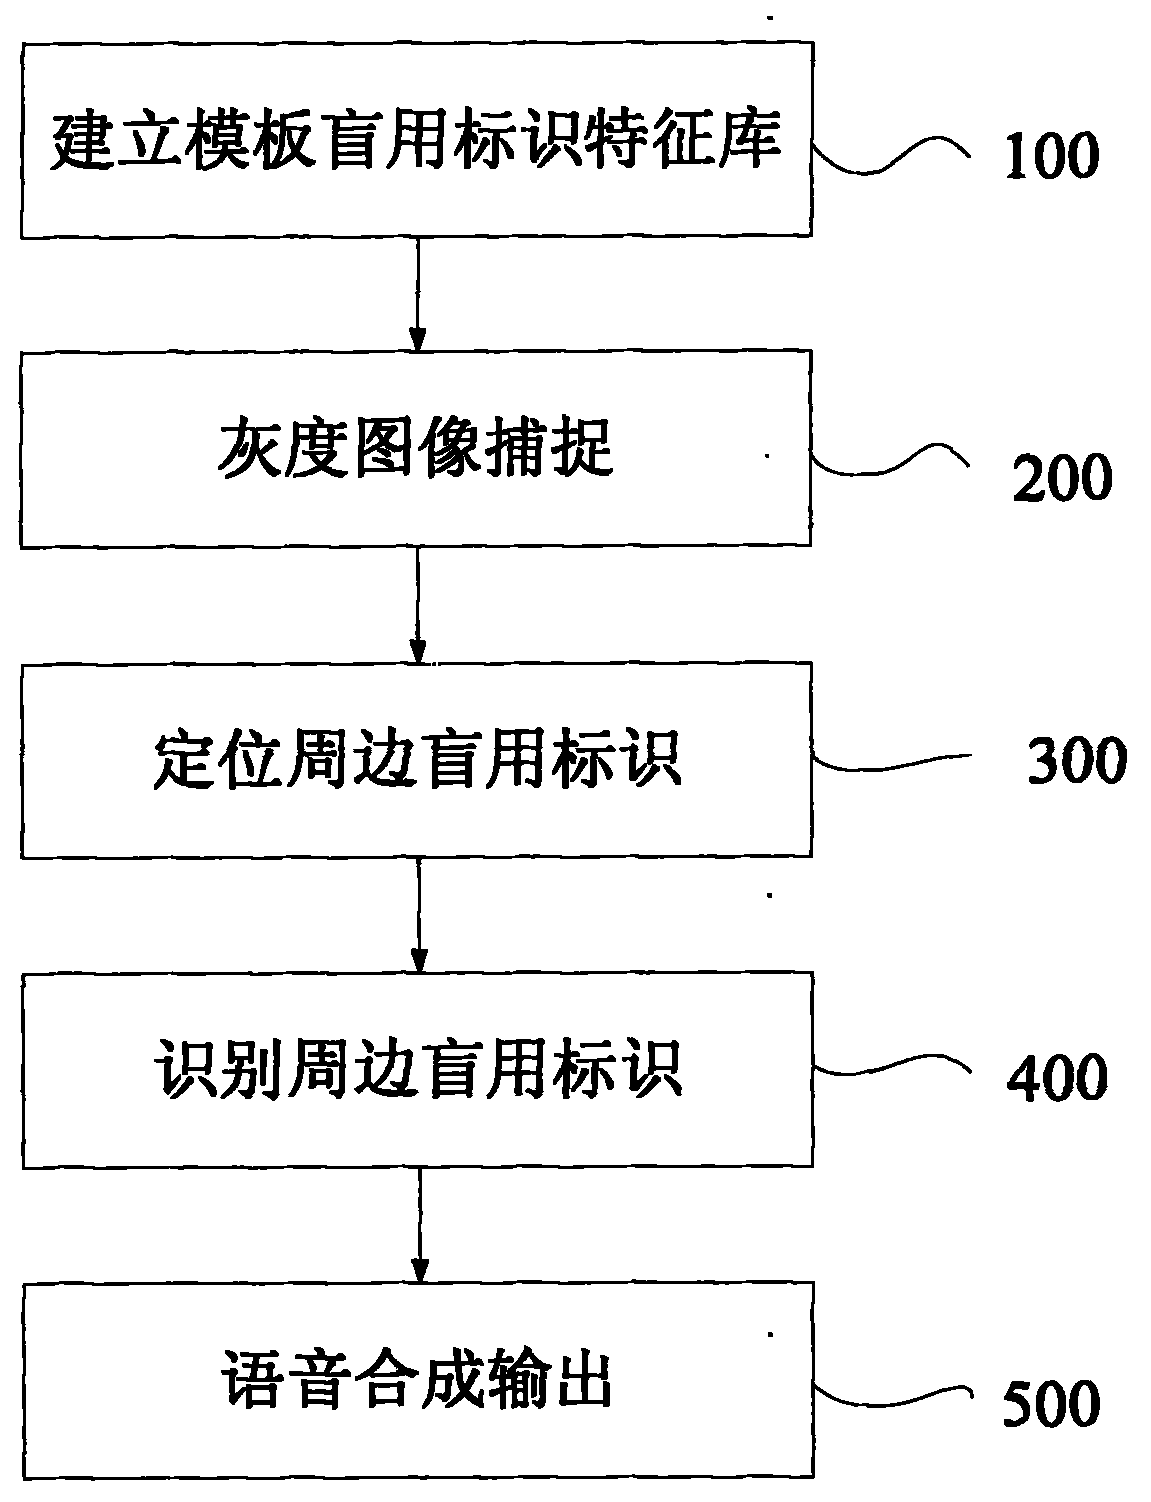 Blind visual compensation method and system for implementing same